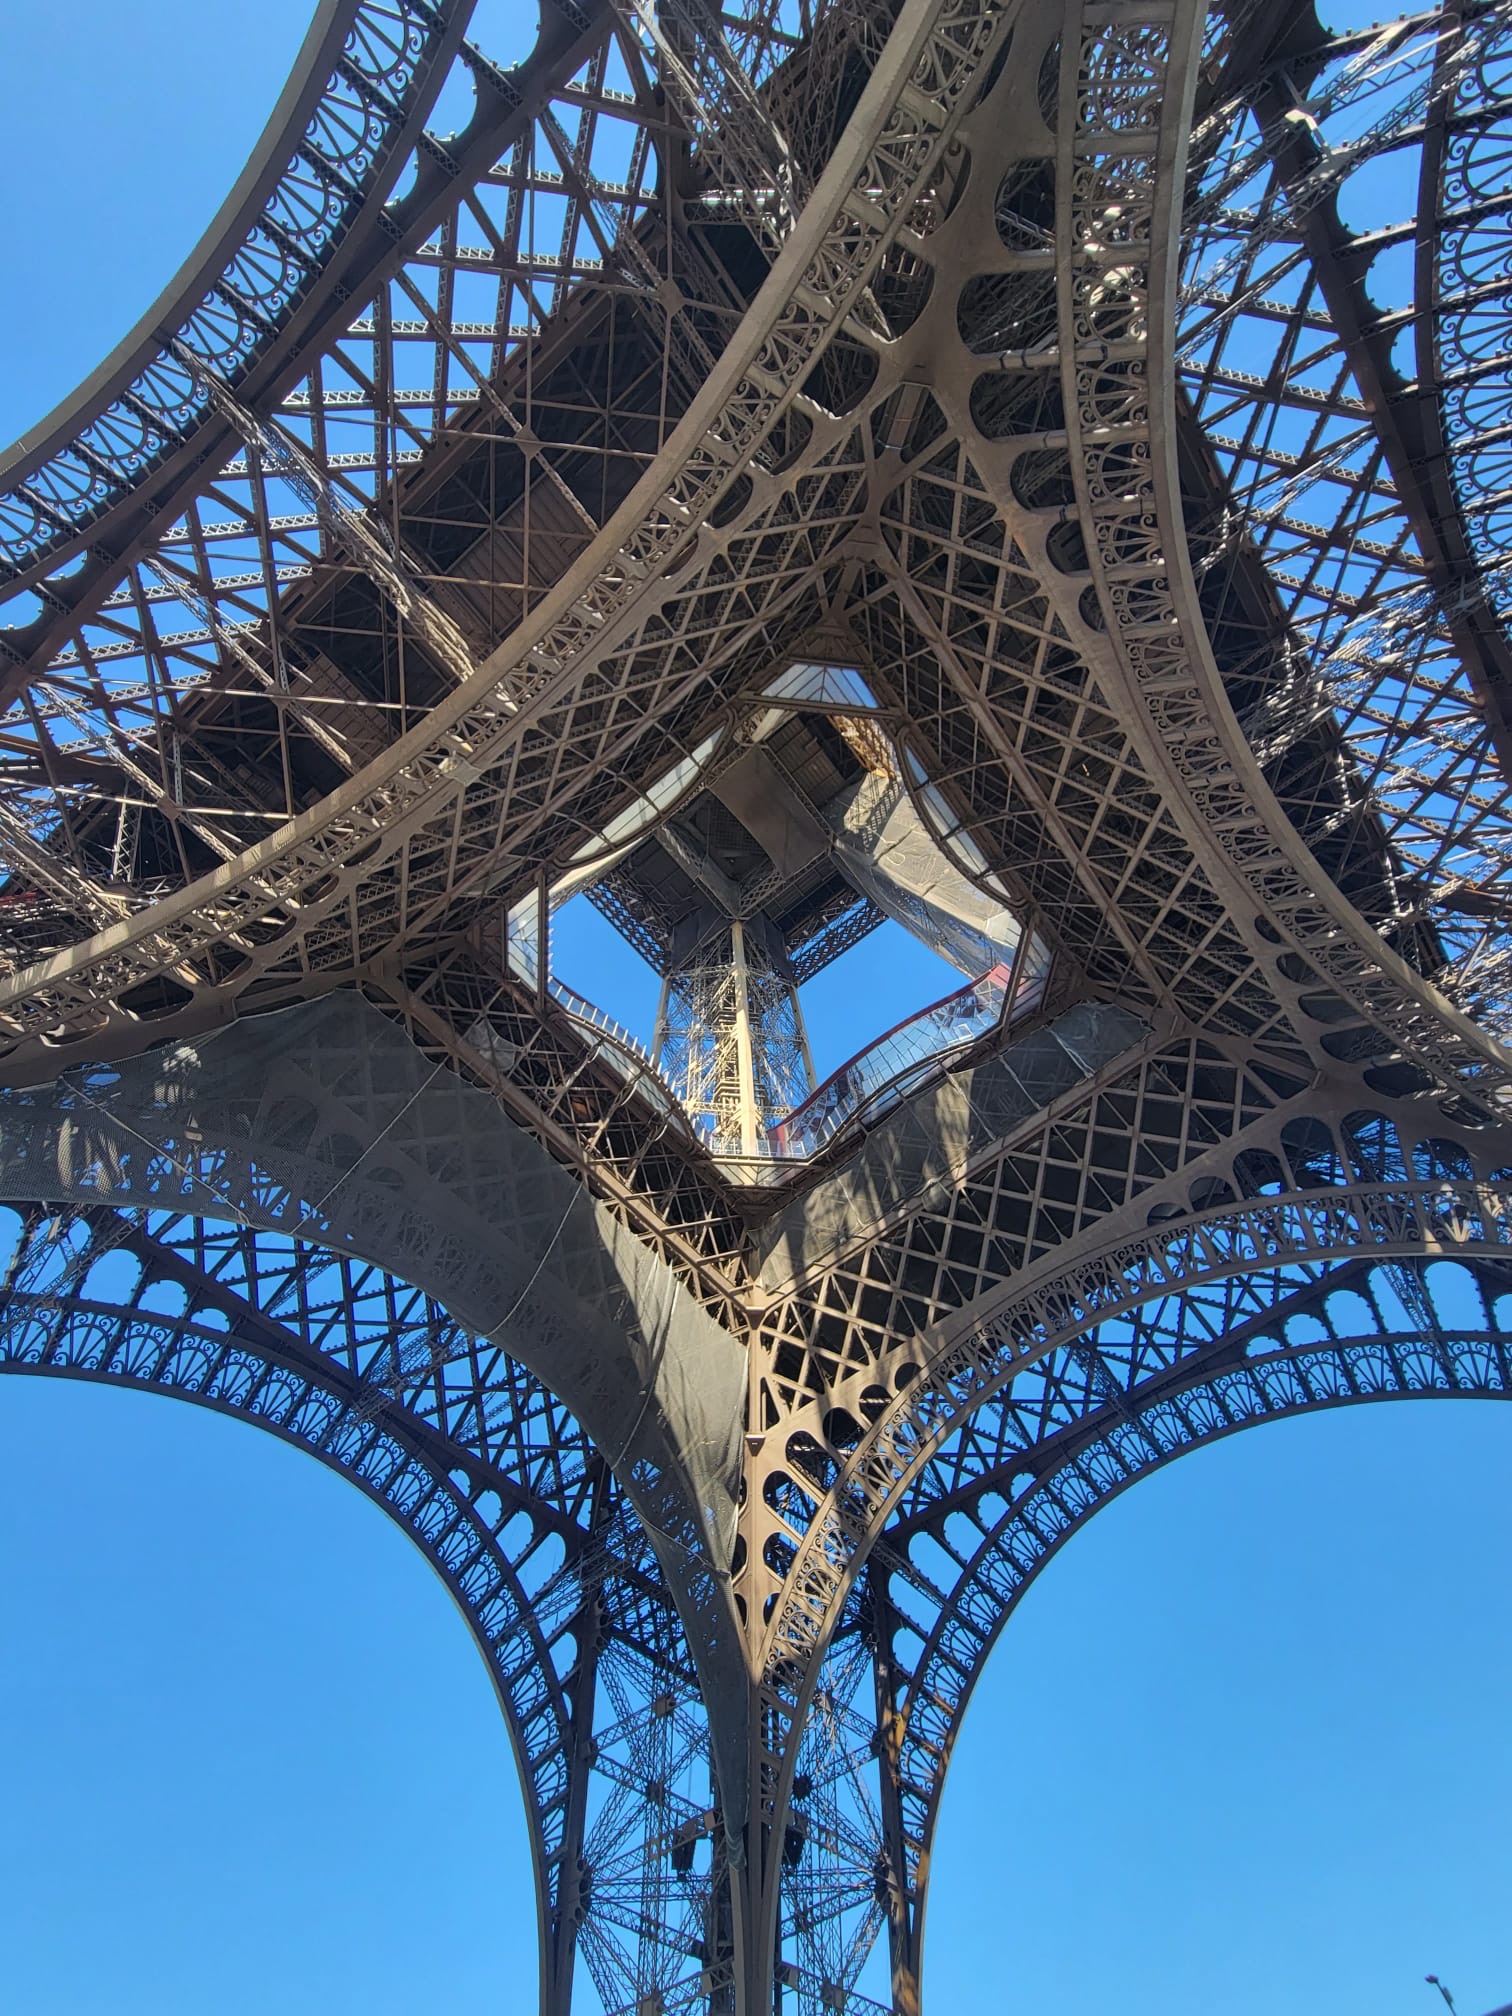 A view looking up through the intricate iron latticework of the Eiffel Tower, showcasing its graceful arches and geometric patterns set against a clear blue sky.